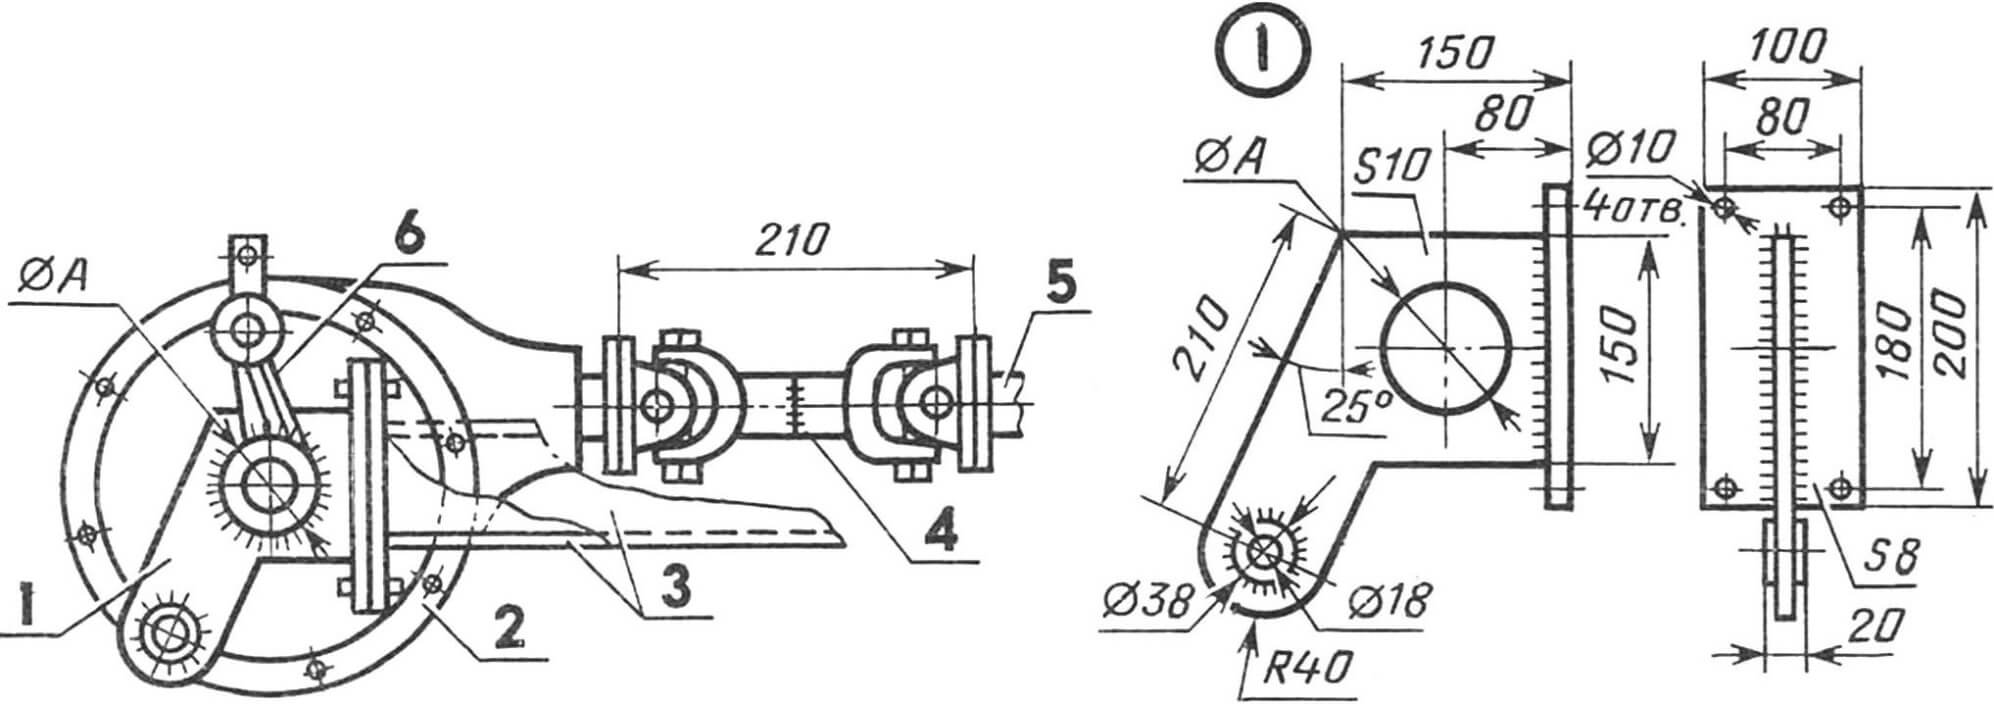 Connection of the rear axle with the main components and parts of the mini-tractor